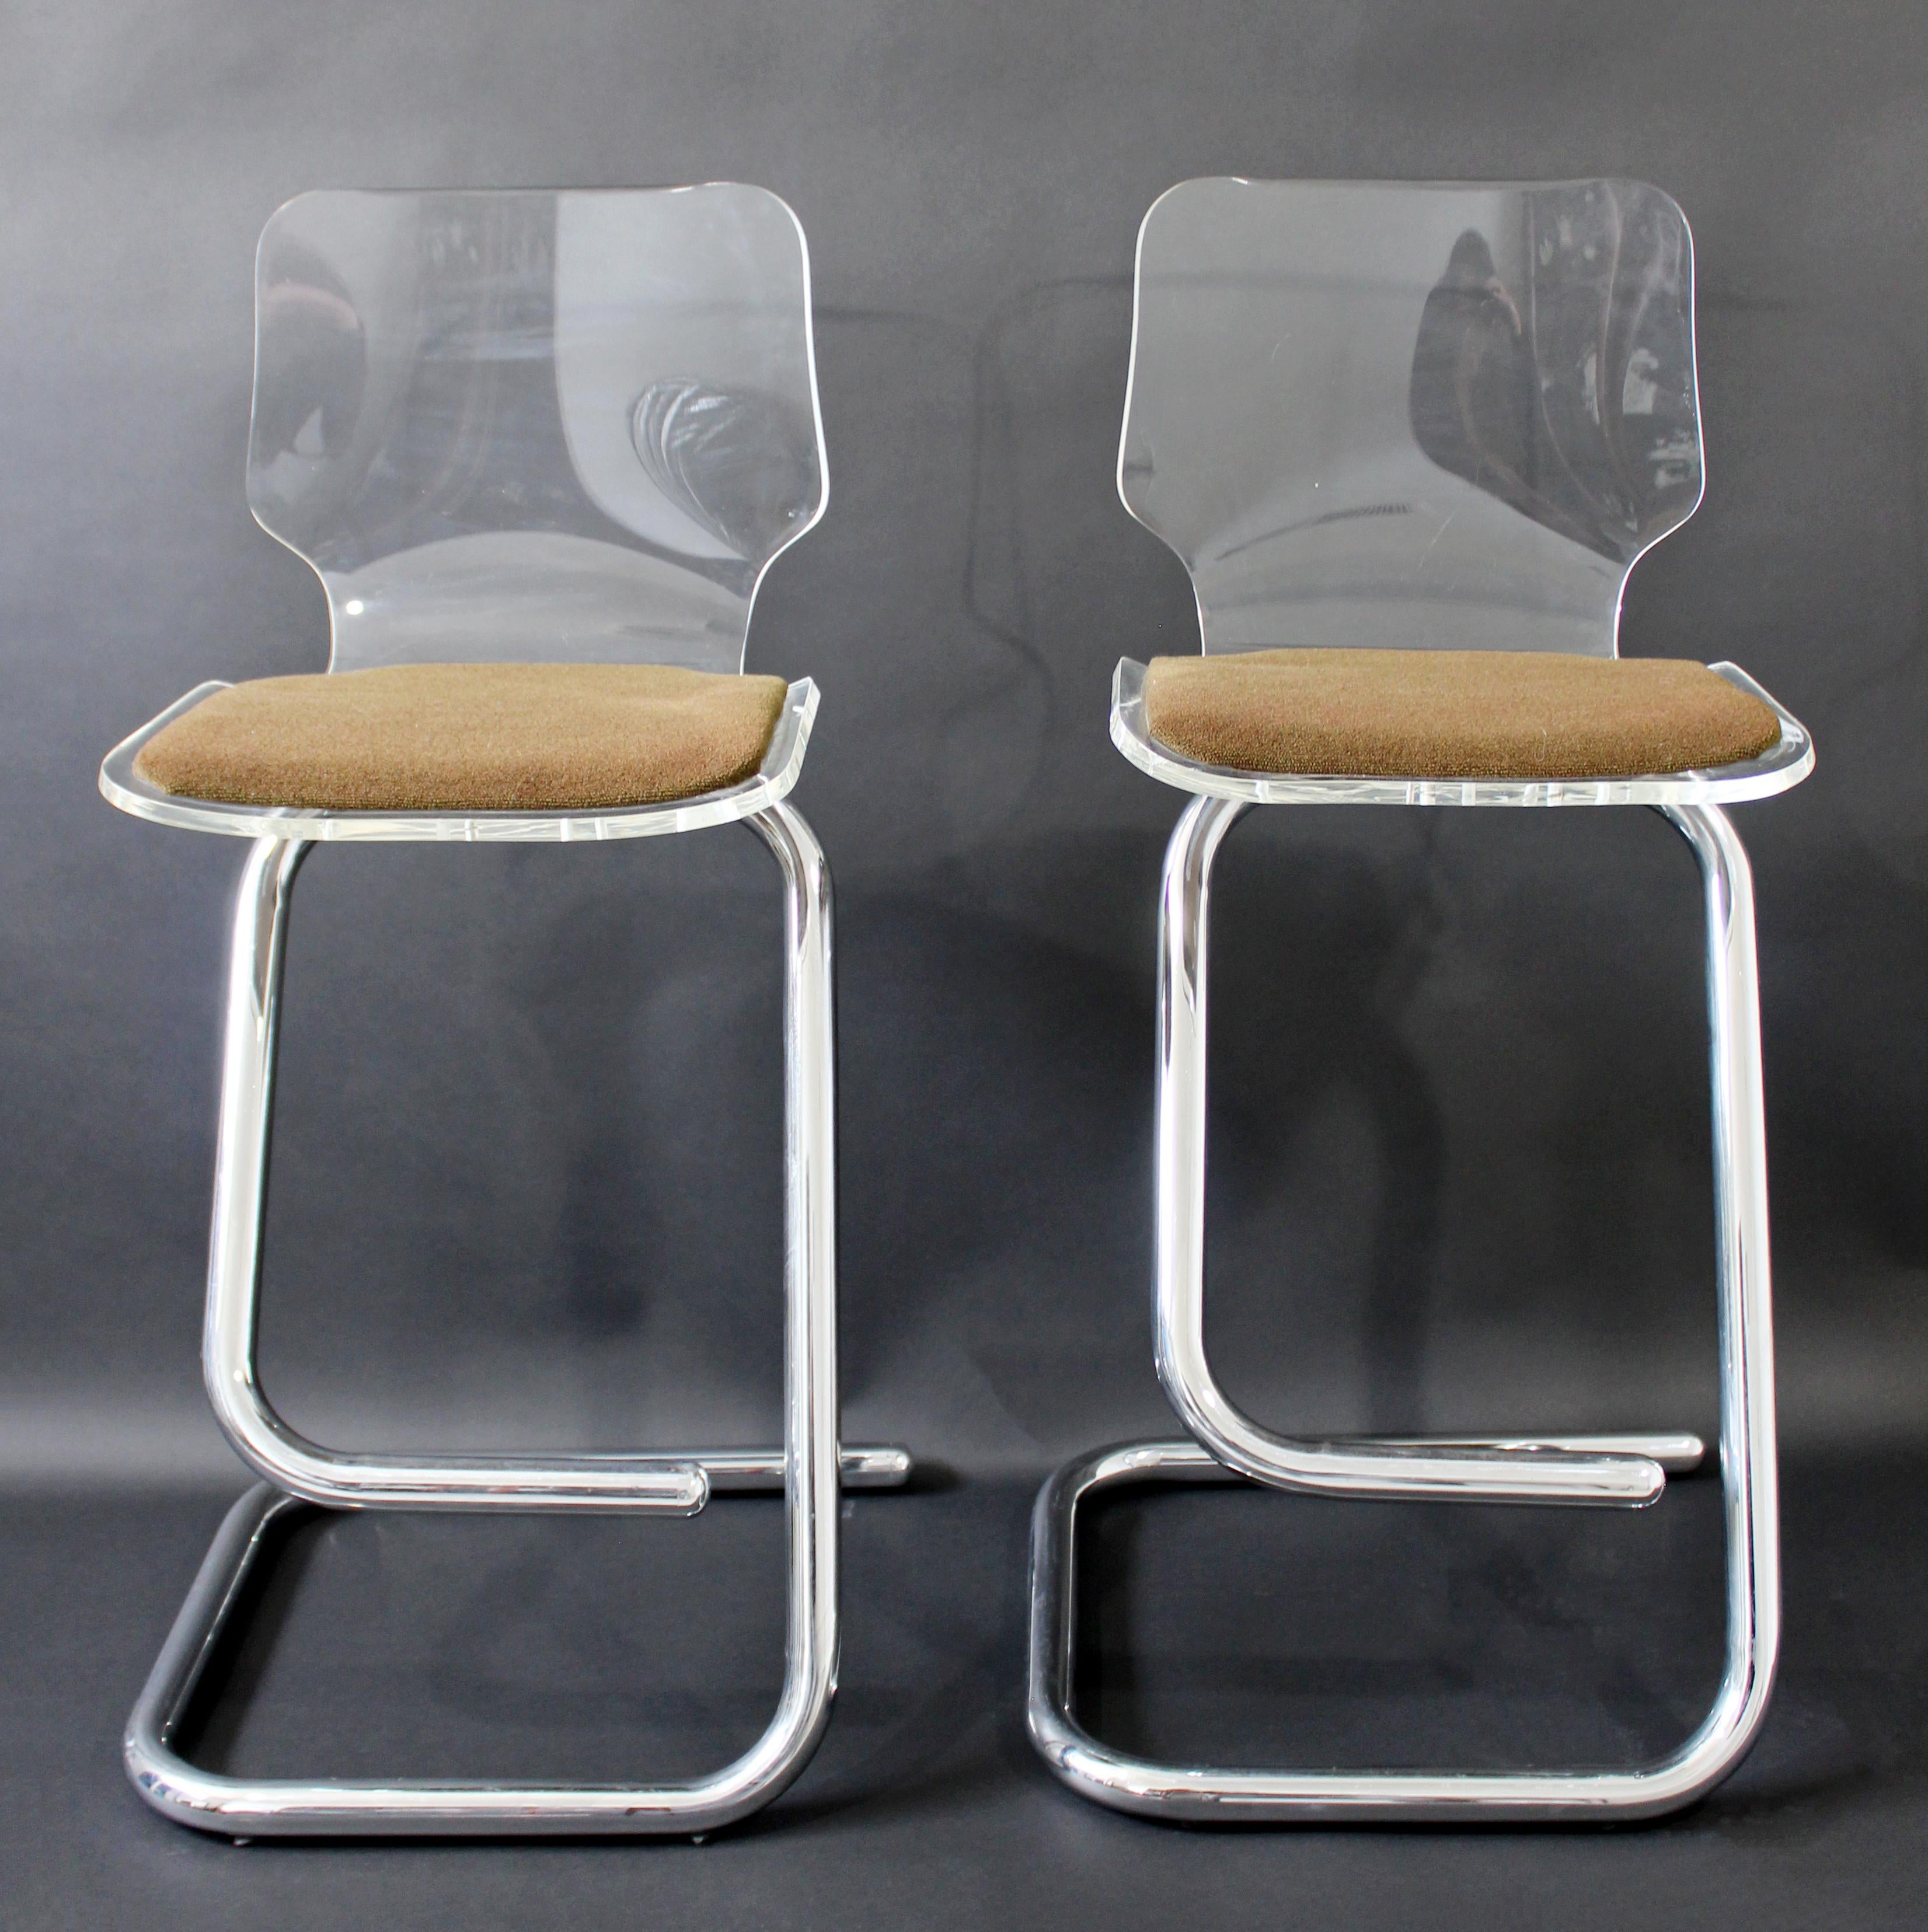 For your consideration is a chic pair of lucite bar stools on chrome bases, by Charles Hollis Jones for Hill Manufacturing, circa the 1970s. In excellent vintage condition. The dimensions are 17